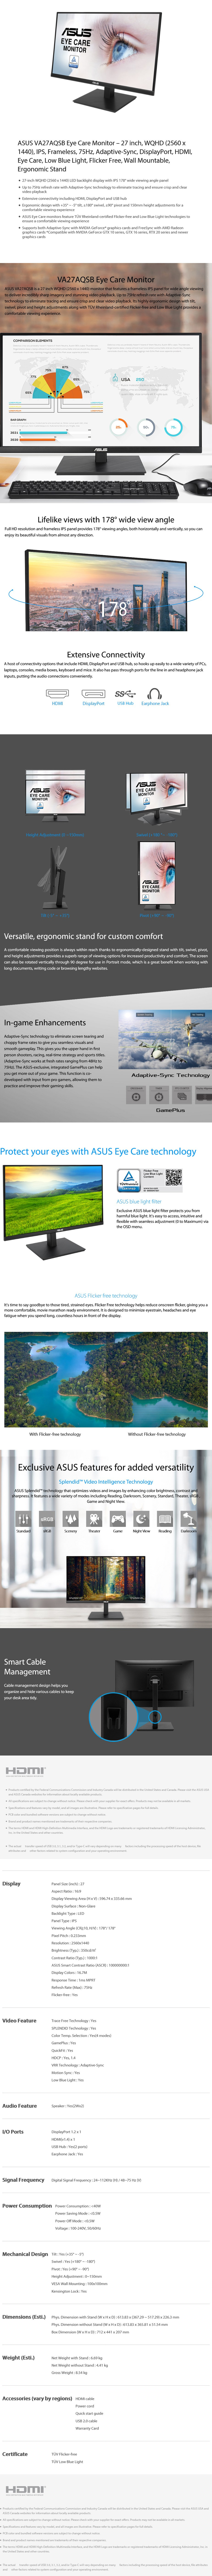 A large marketing image providing additional information about the product ASUS VA27AQSB 27" QHD 75Hz IPS Monitor - Additional alt info not provided